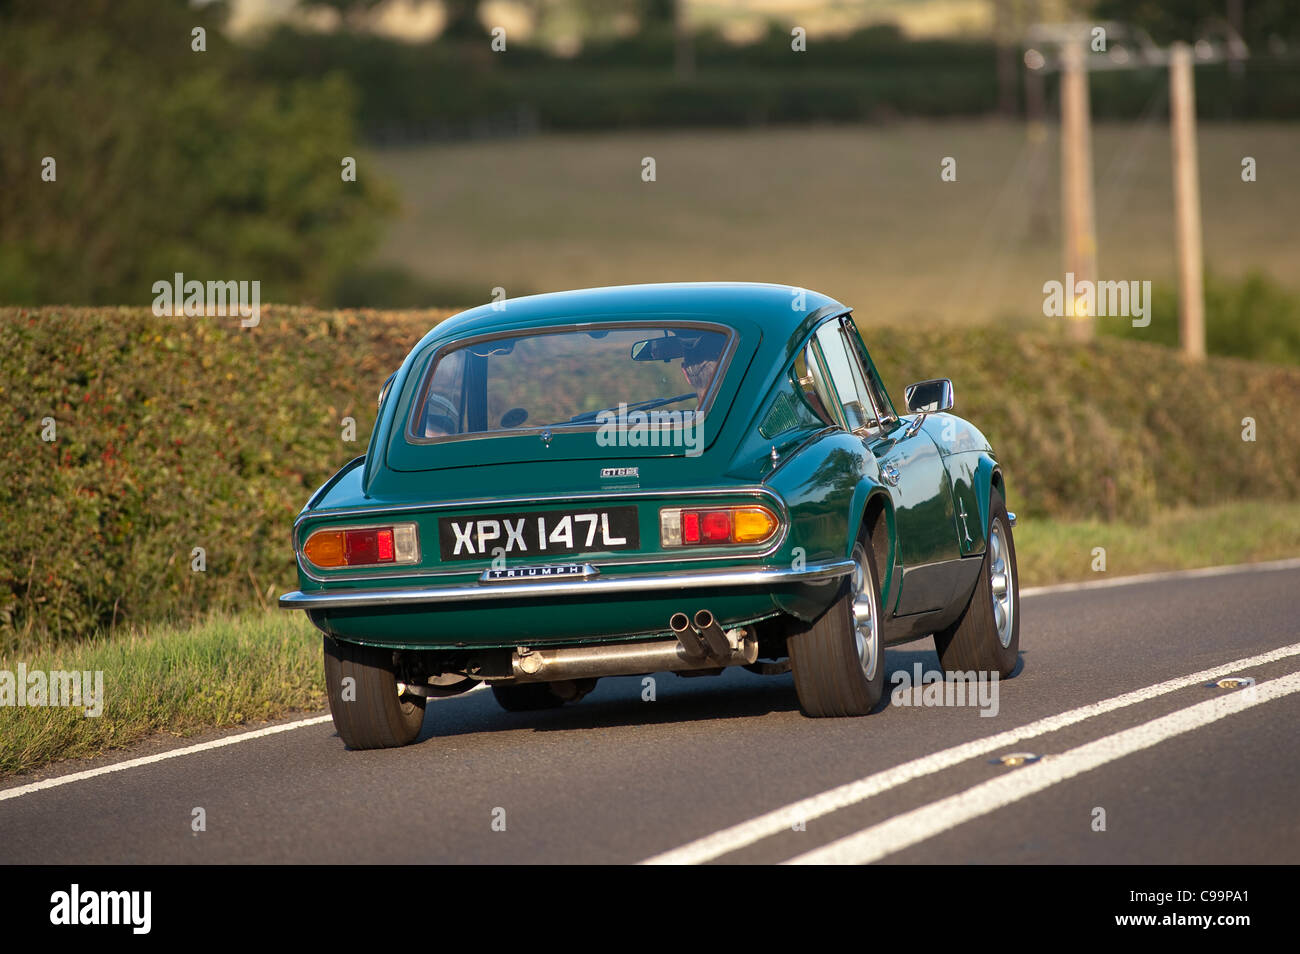 Rear view of a Triumph GT6 car being driven through rural England in the summertime. Stock Photo